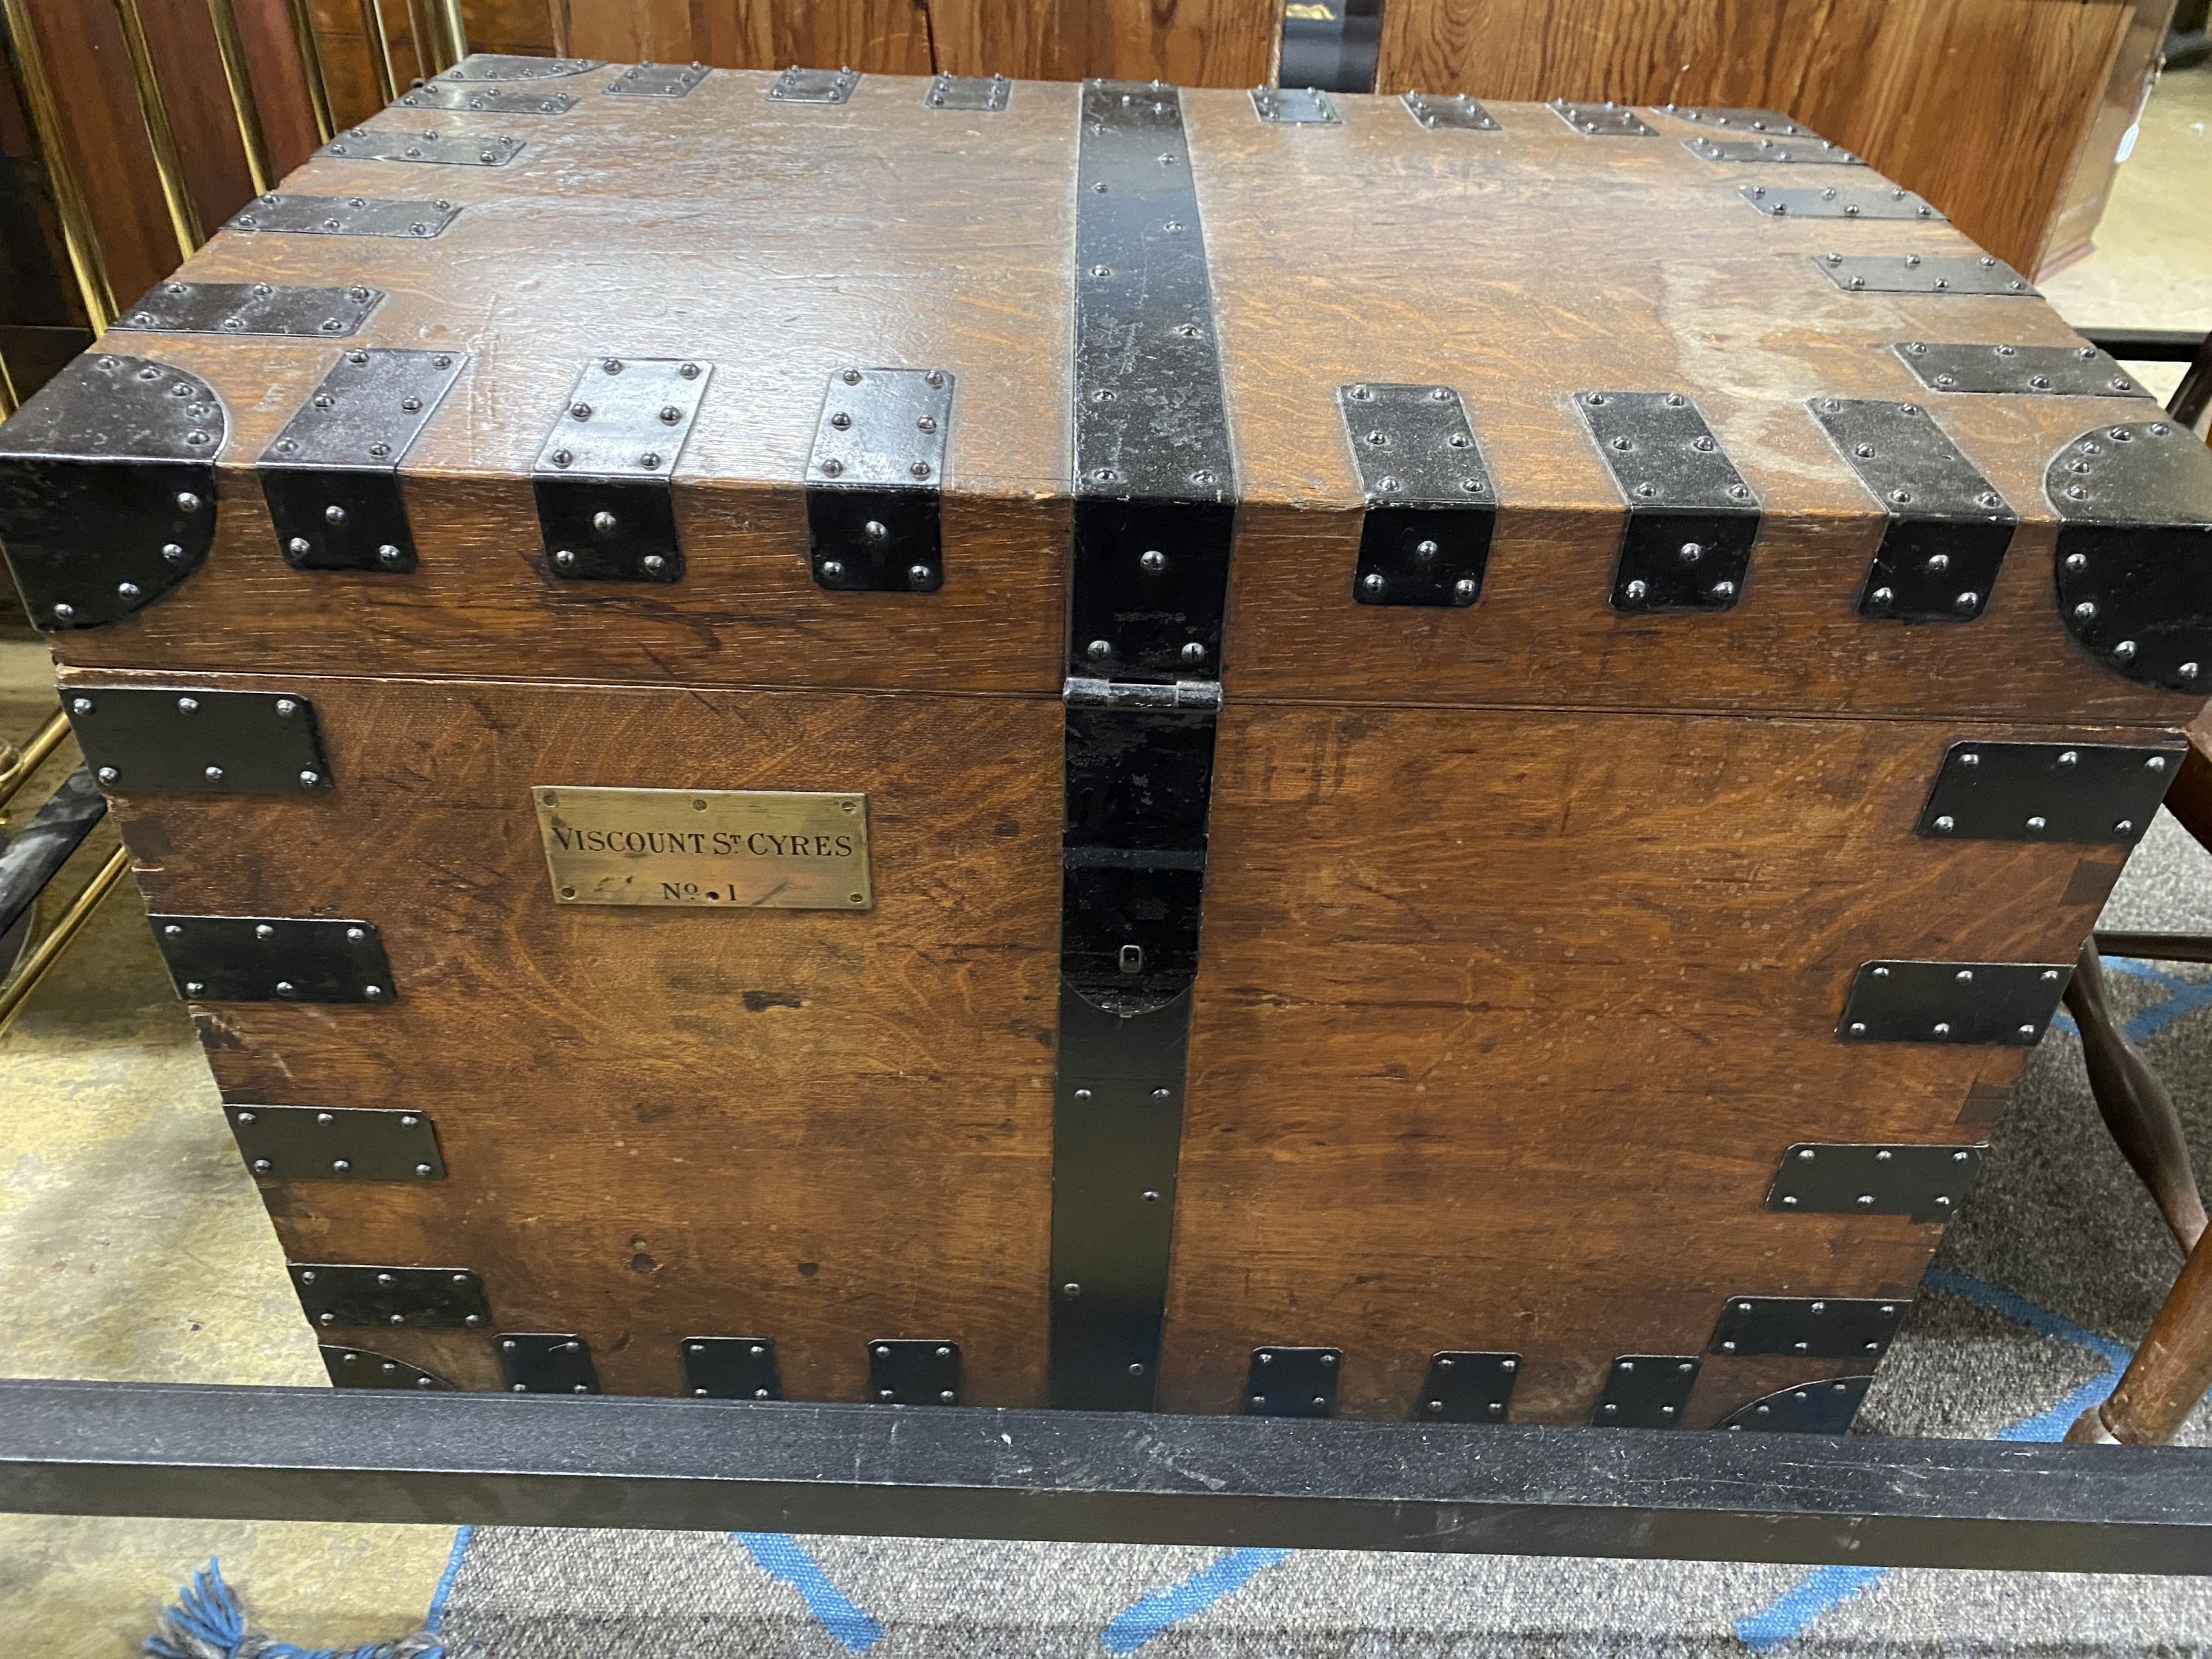 A Victorian iron bound oak silver chest, the engraved brass plaque reads 'Viscount St Cyers No 1', width 89cm, depth 63cm, height 65cm